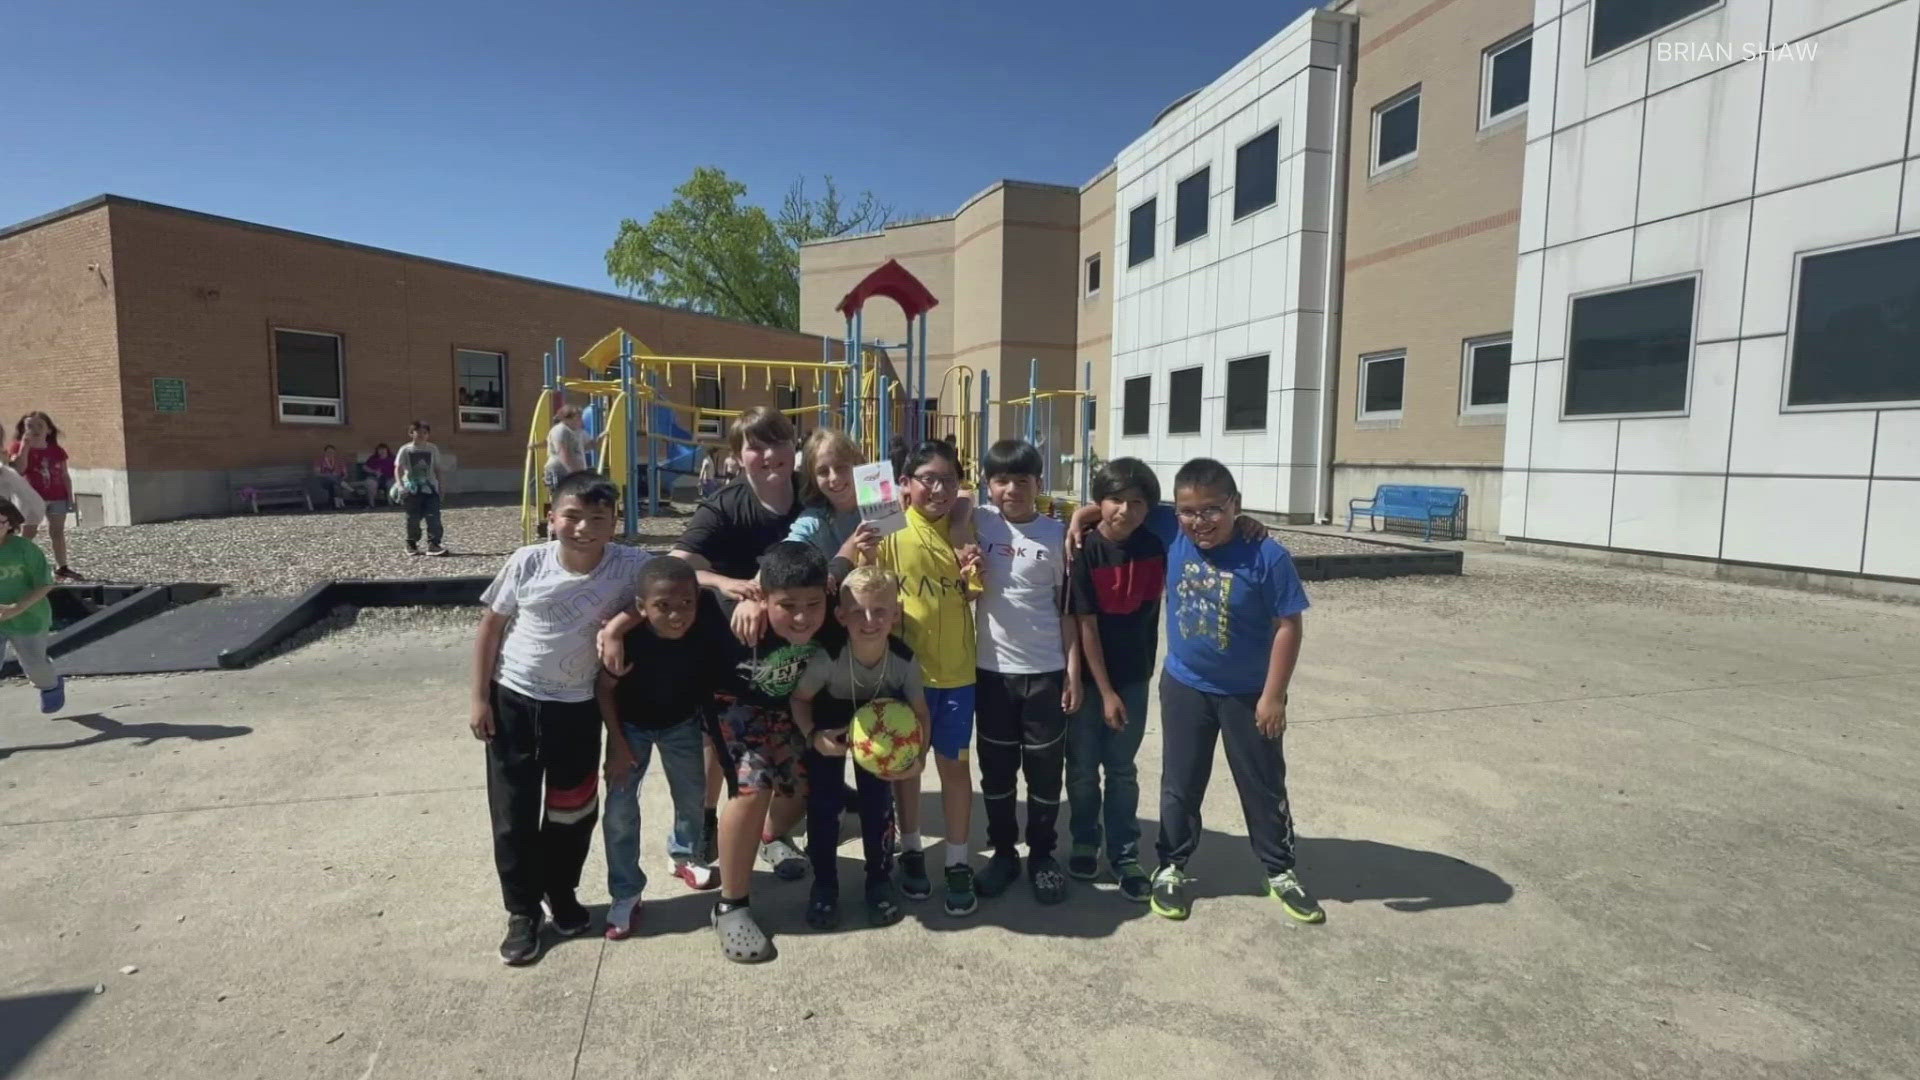 The class of Clarksville Schools summer students have been playing soccer together everyday during recess, with students teaching each other the rules of the game.